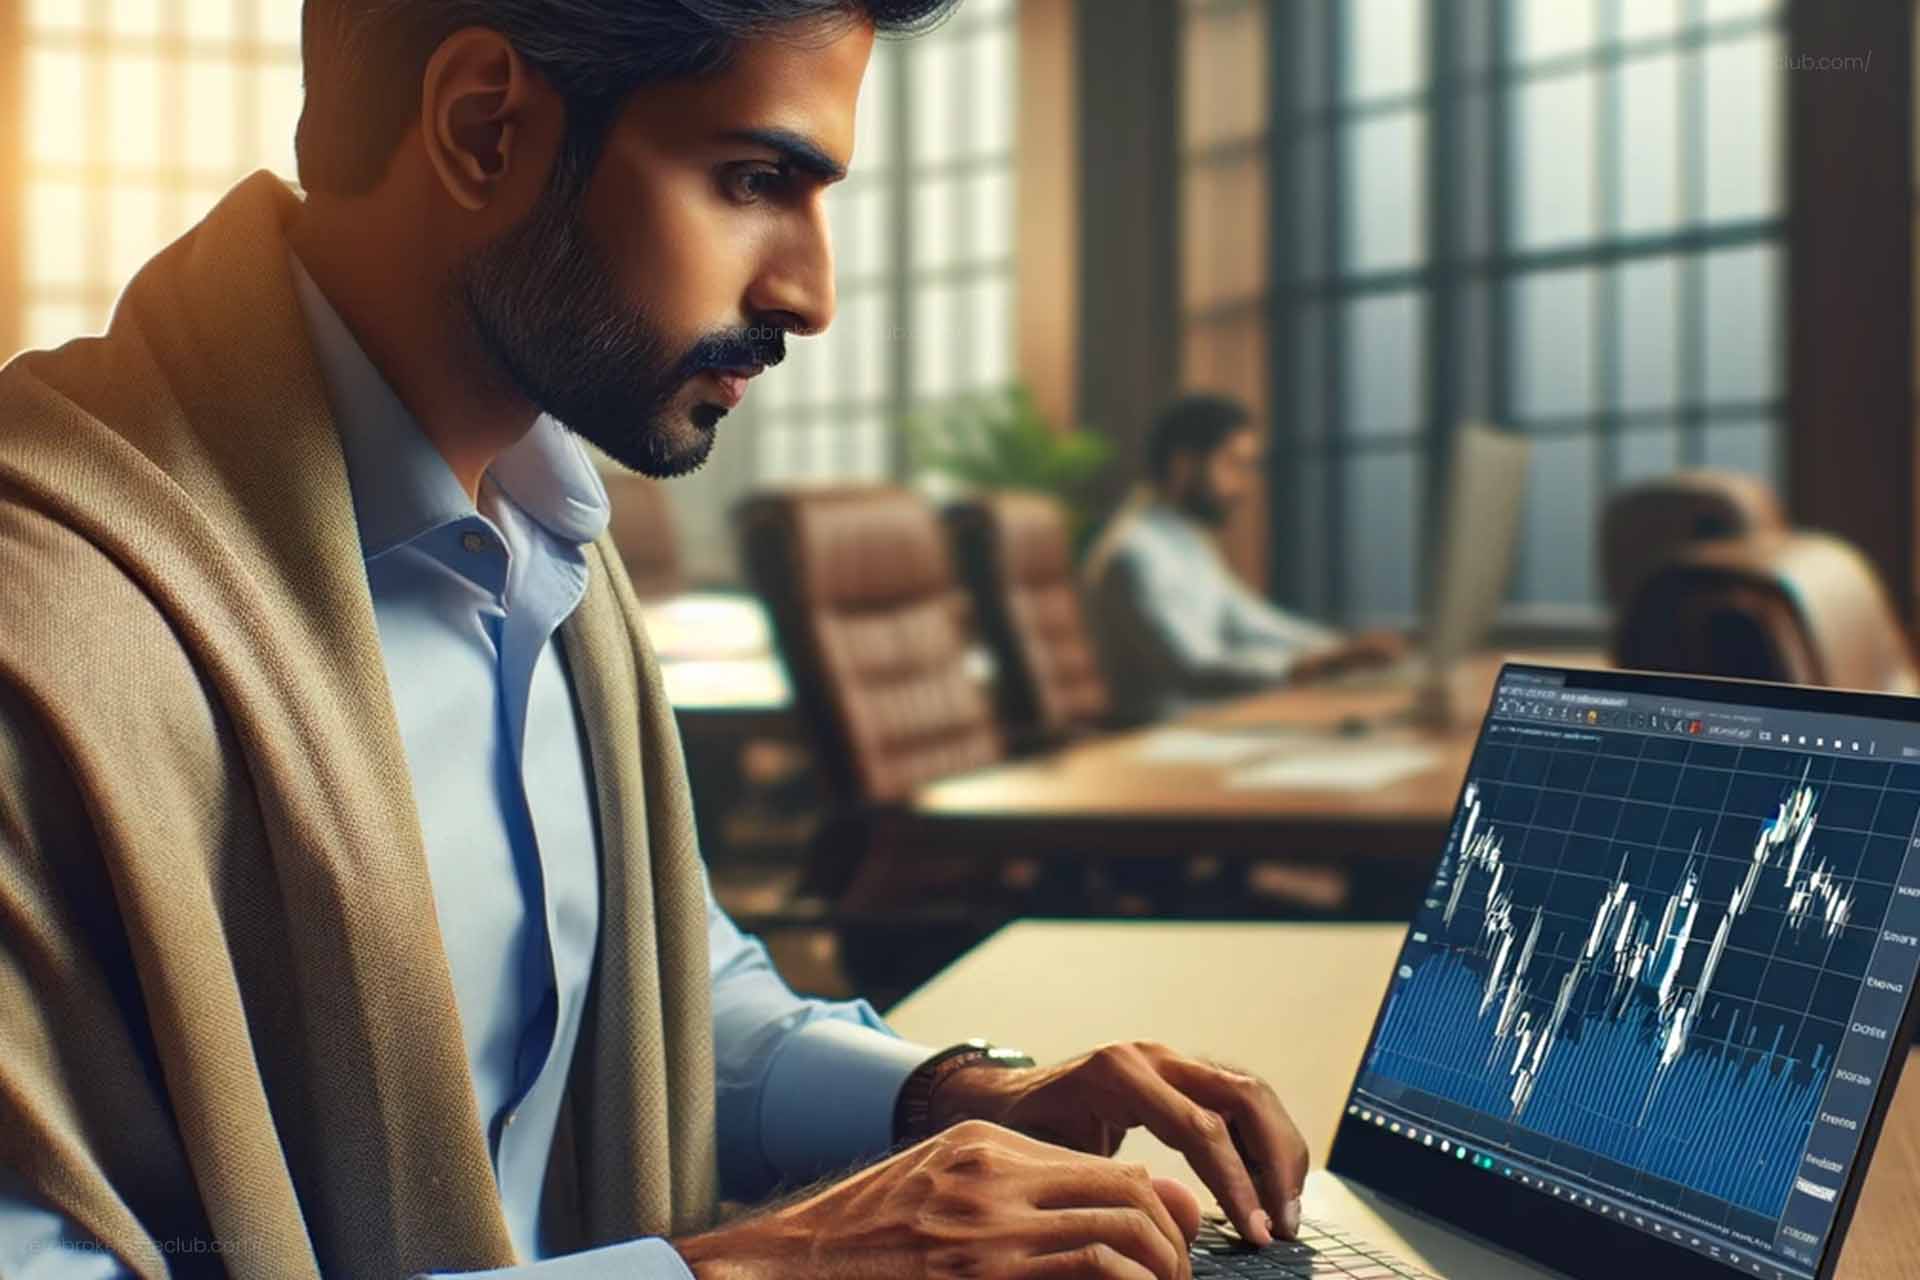 An Ultimate Guide to Using Oscillators in Technical Analysis